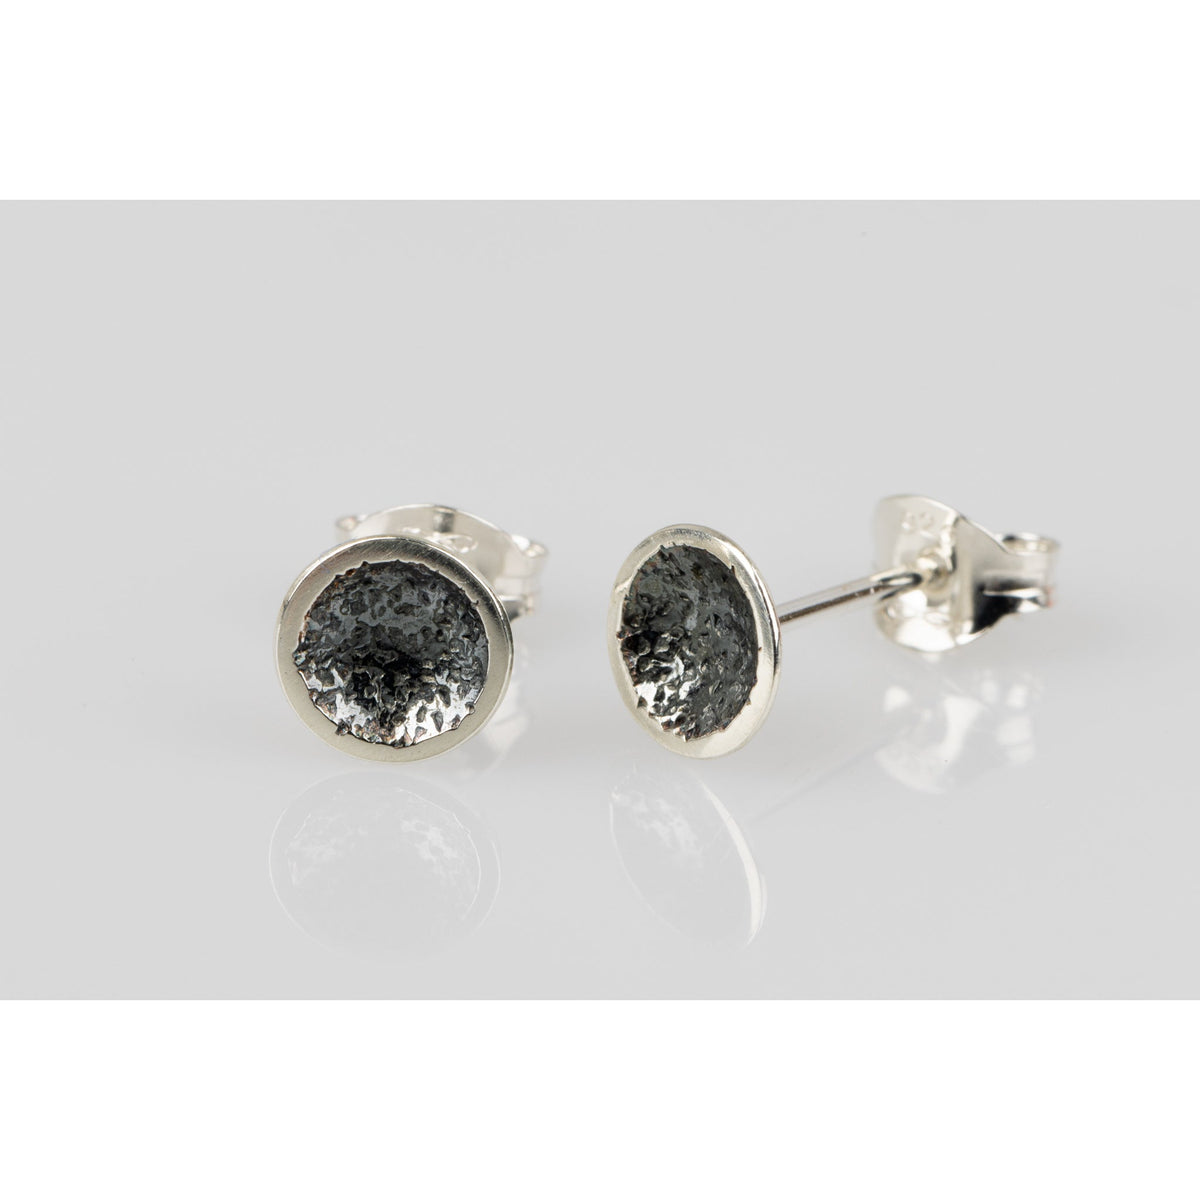 &#39;SA Ea49 Domed oxidised textured studs&#39; by Sandra Austin jewellery, available at Padstow Gallery, Cornwall